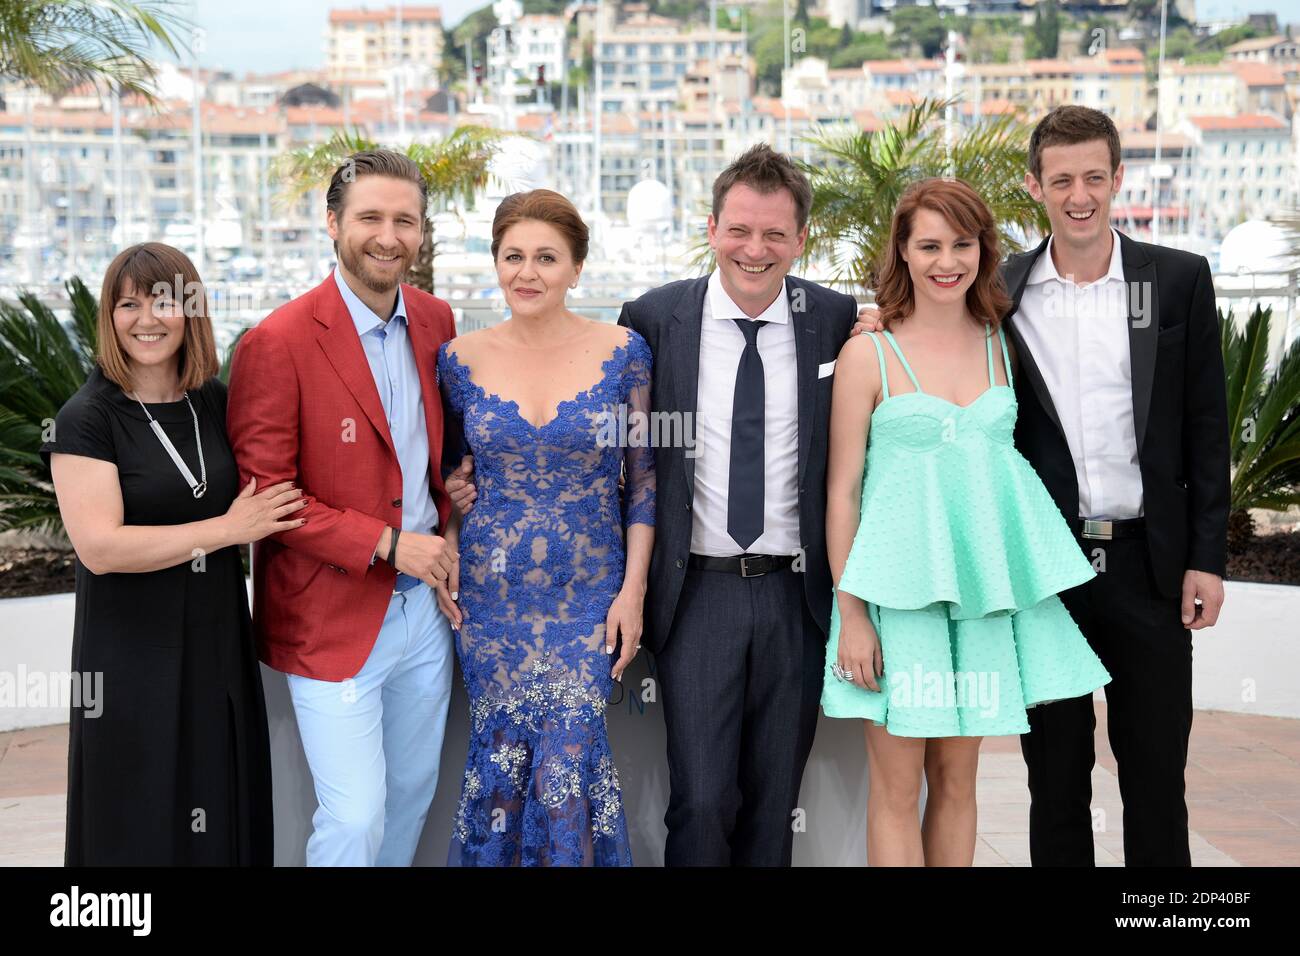 Nives Ivankovic, Dalibor Matanic, Tihana Lazovic and Dado Cosic posing at the photocall for the film Zvidan as part of the 68th Cannes Film Festival in Cannes, France on May 17, 2015. Photo by Nicolas Briquet/ABACAPRESS.COM Stock Photo